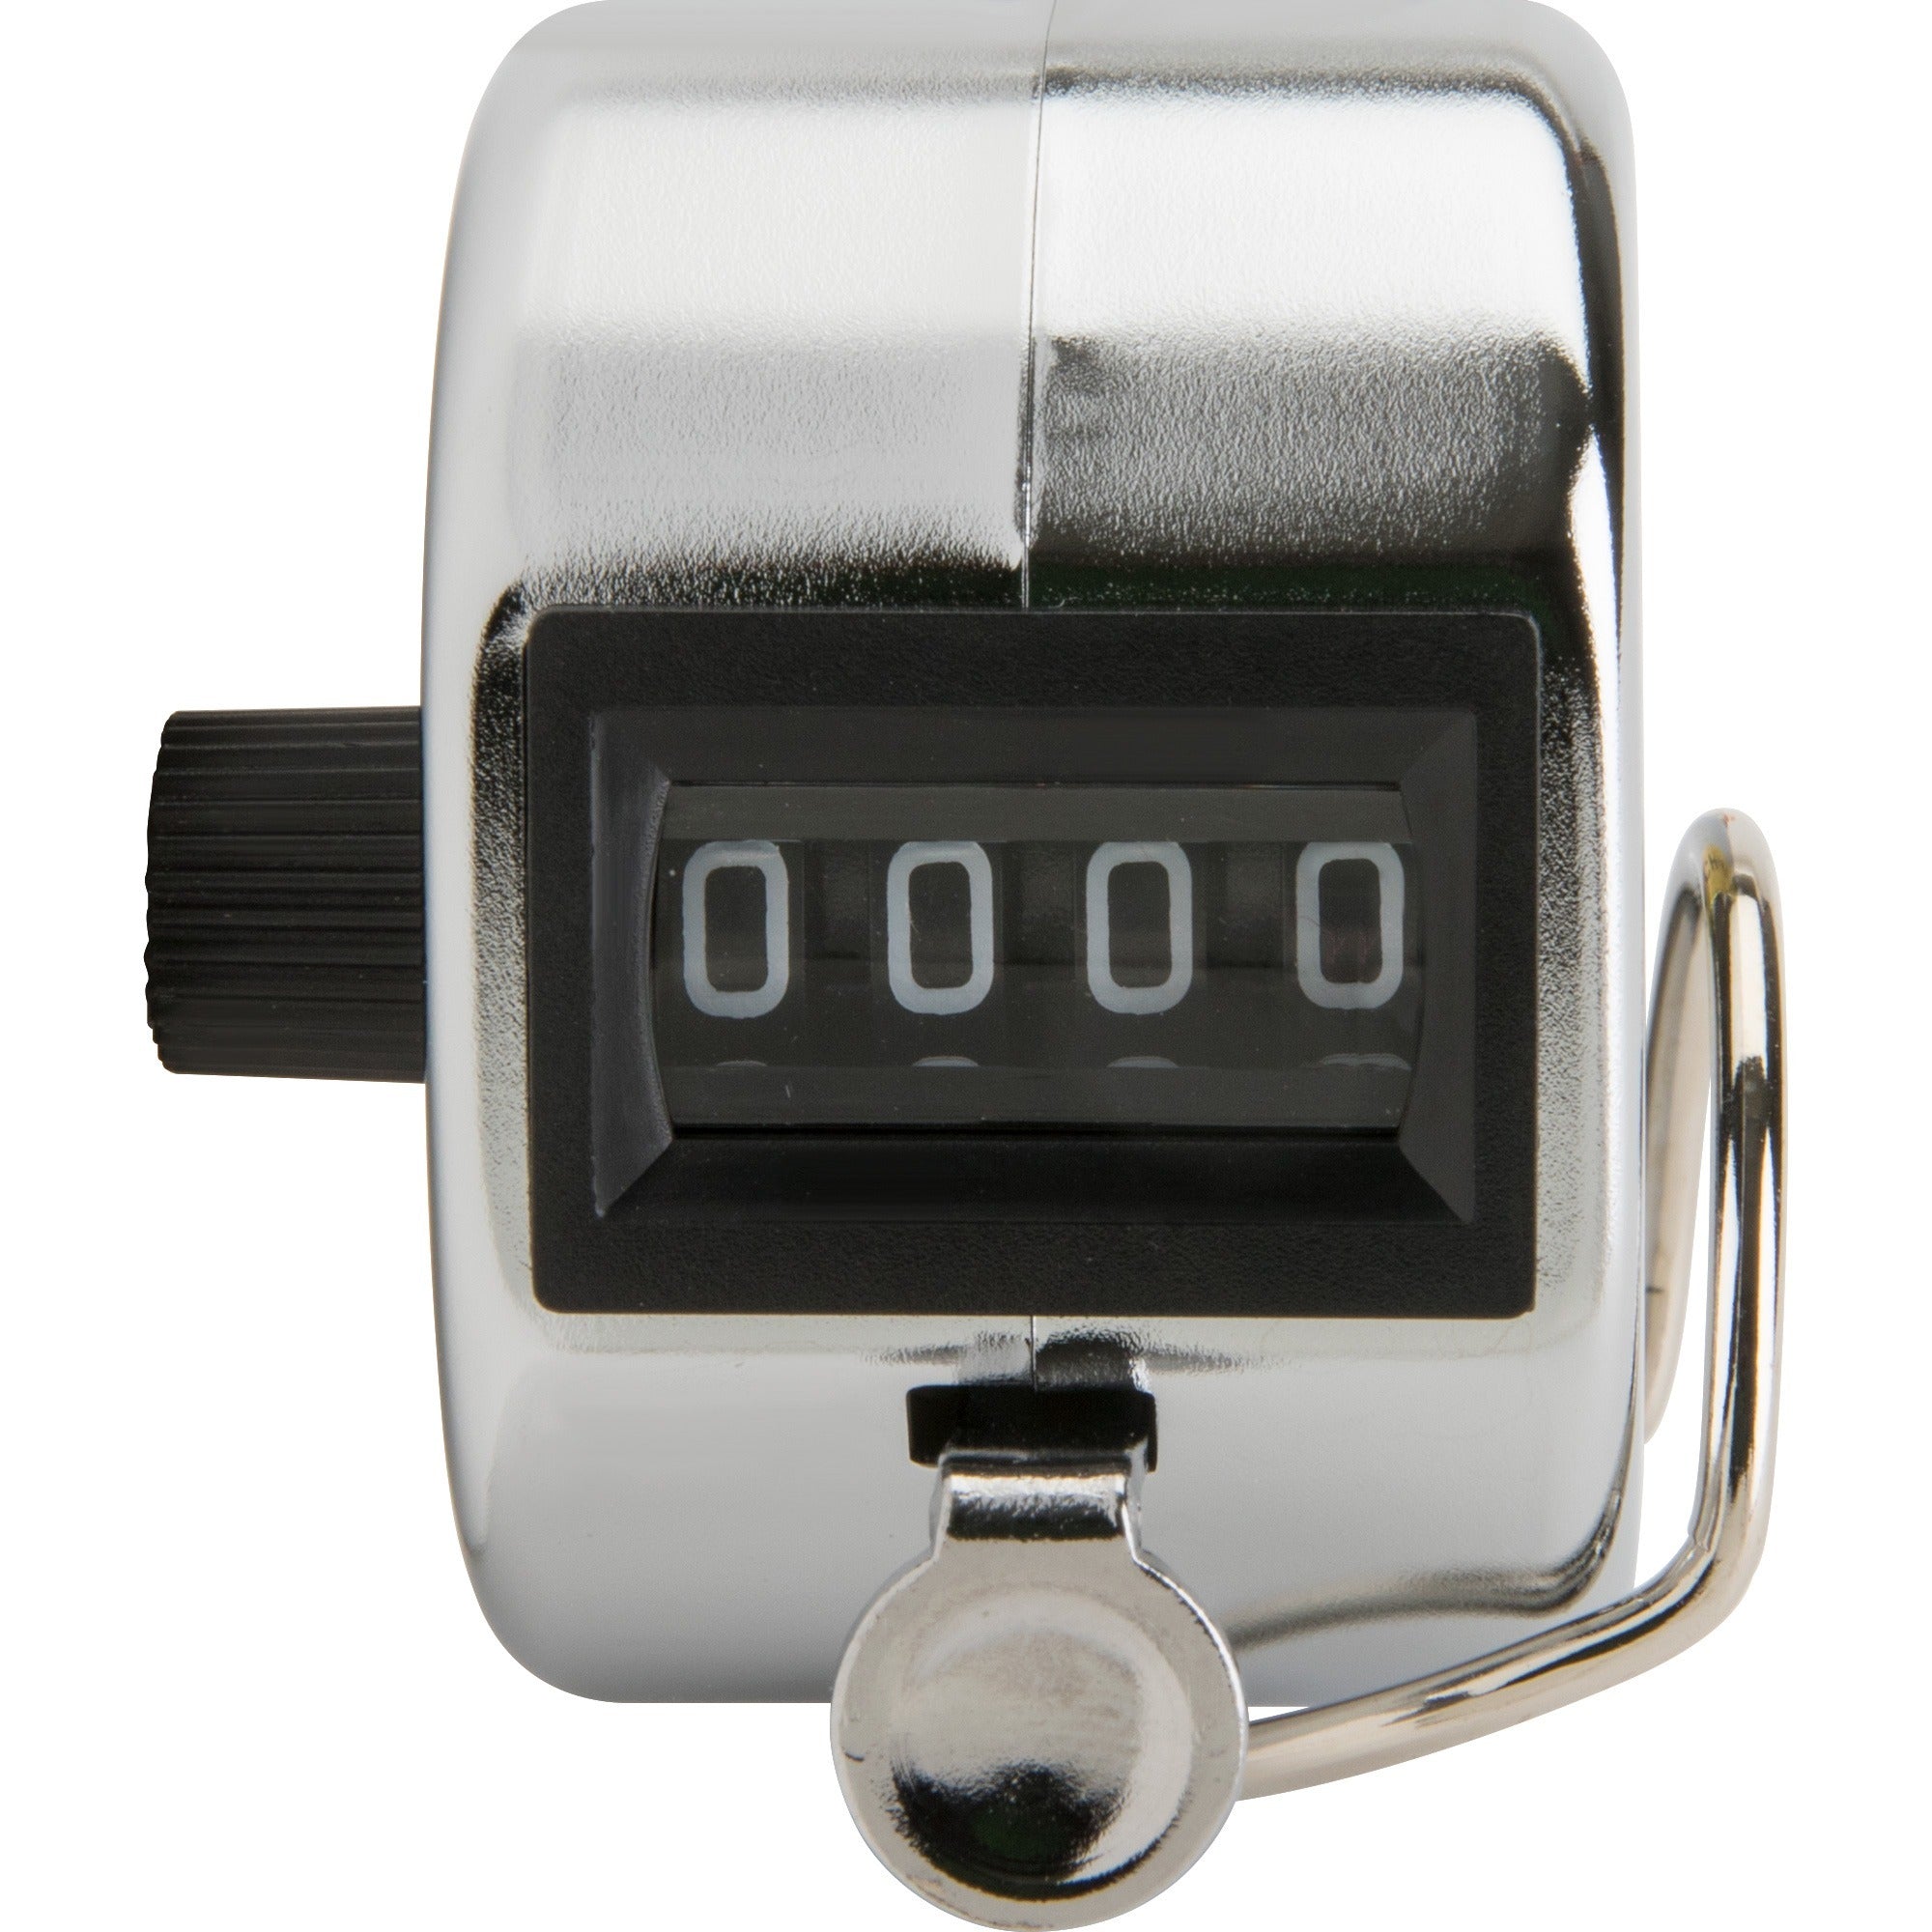 Sparco Finger Ring Tally Counter - 4 Digit - Finger Ring - Handheld - Chrome Plated Steel - Silver - 